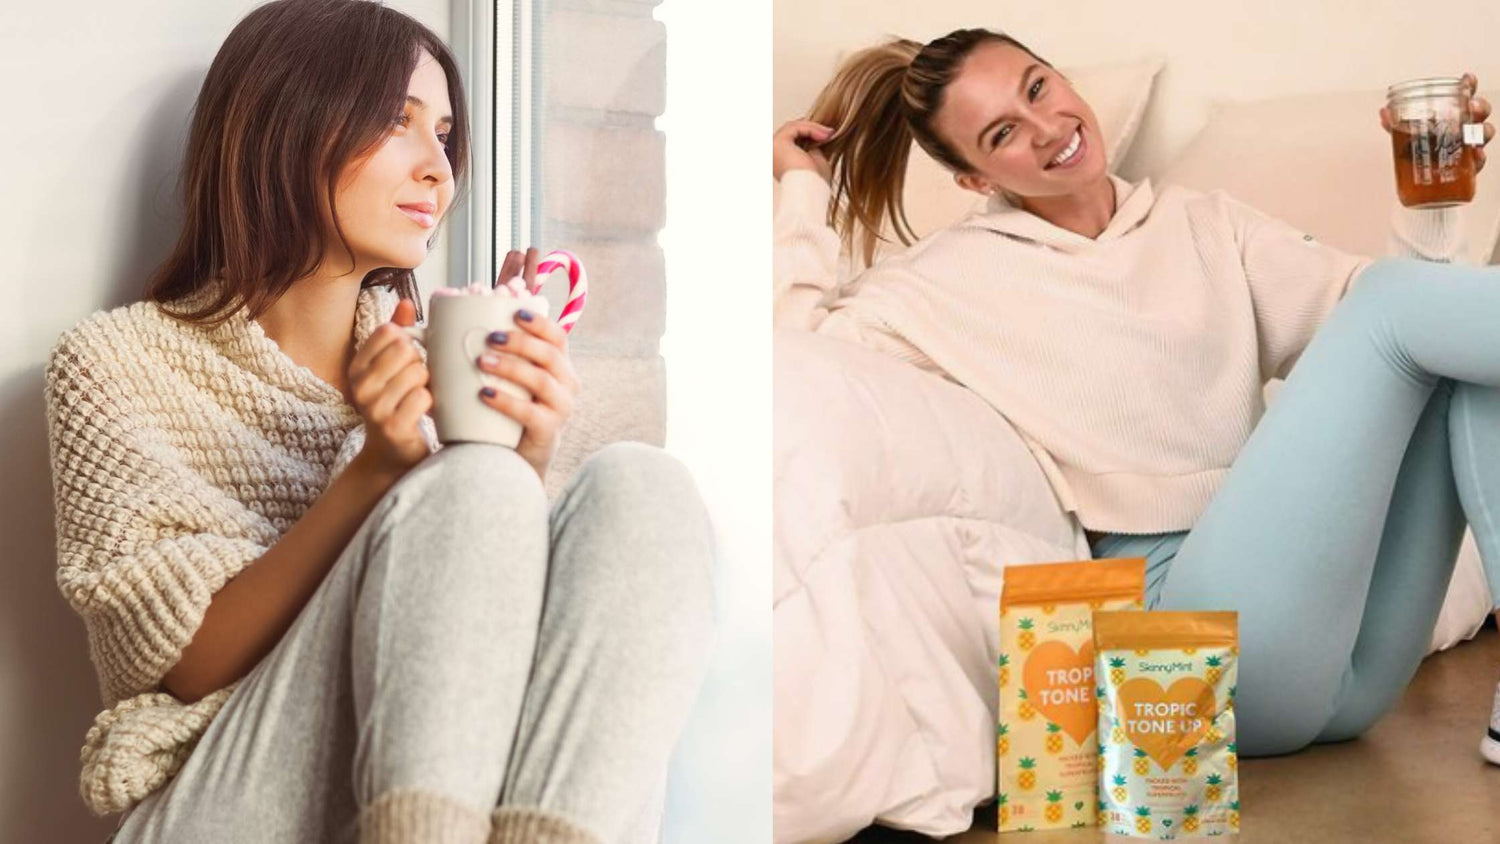 Woman drinking hot chocolate and woman drinking Tropic Tone Up during the holidays.